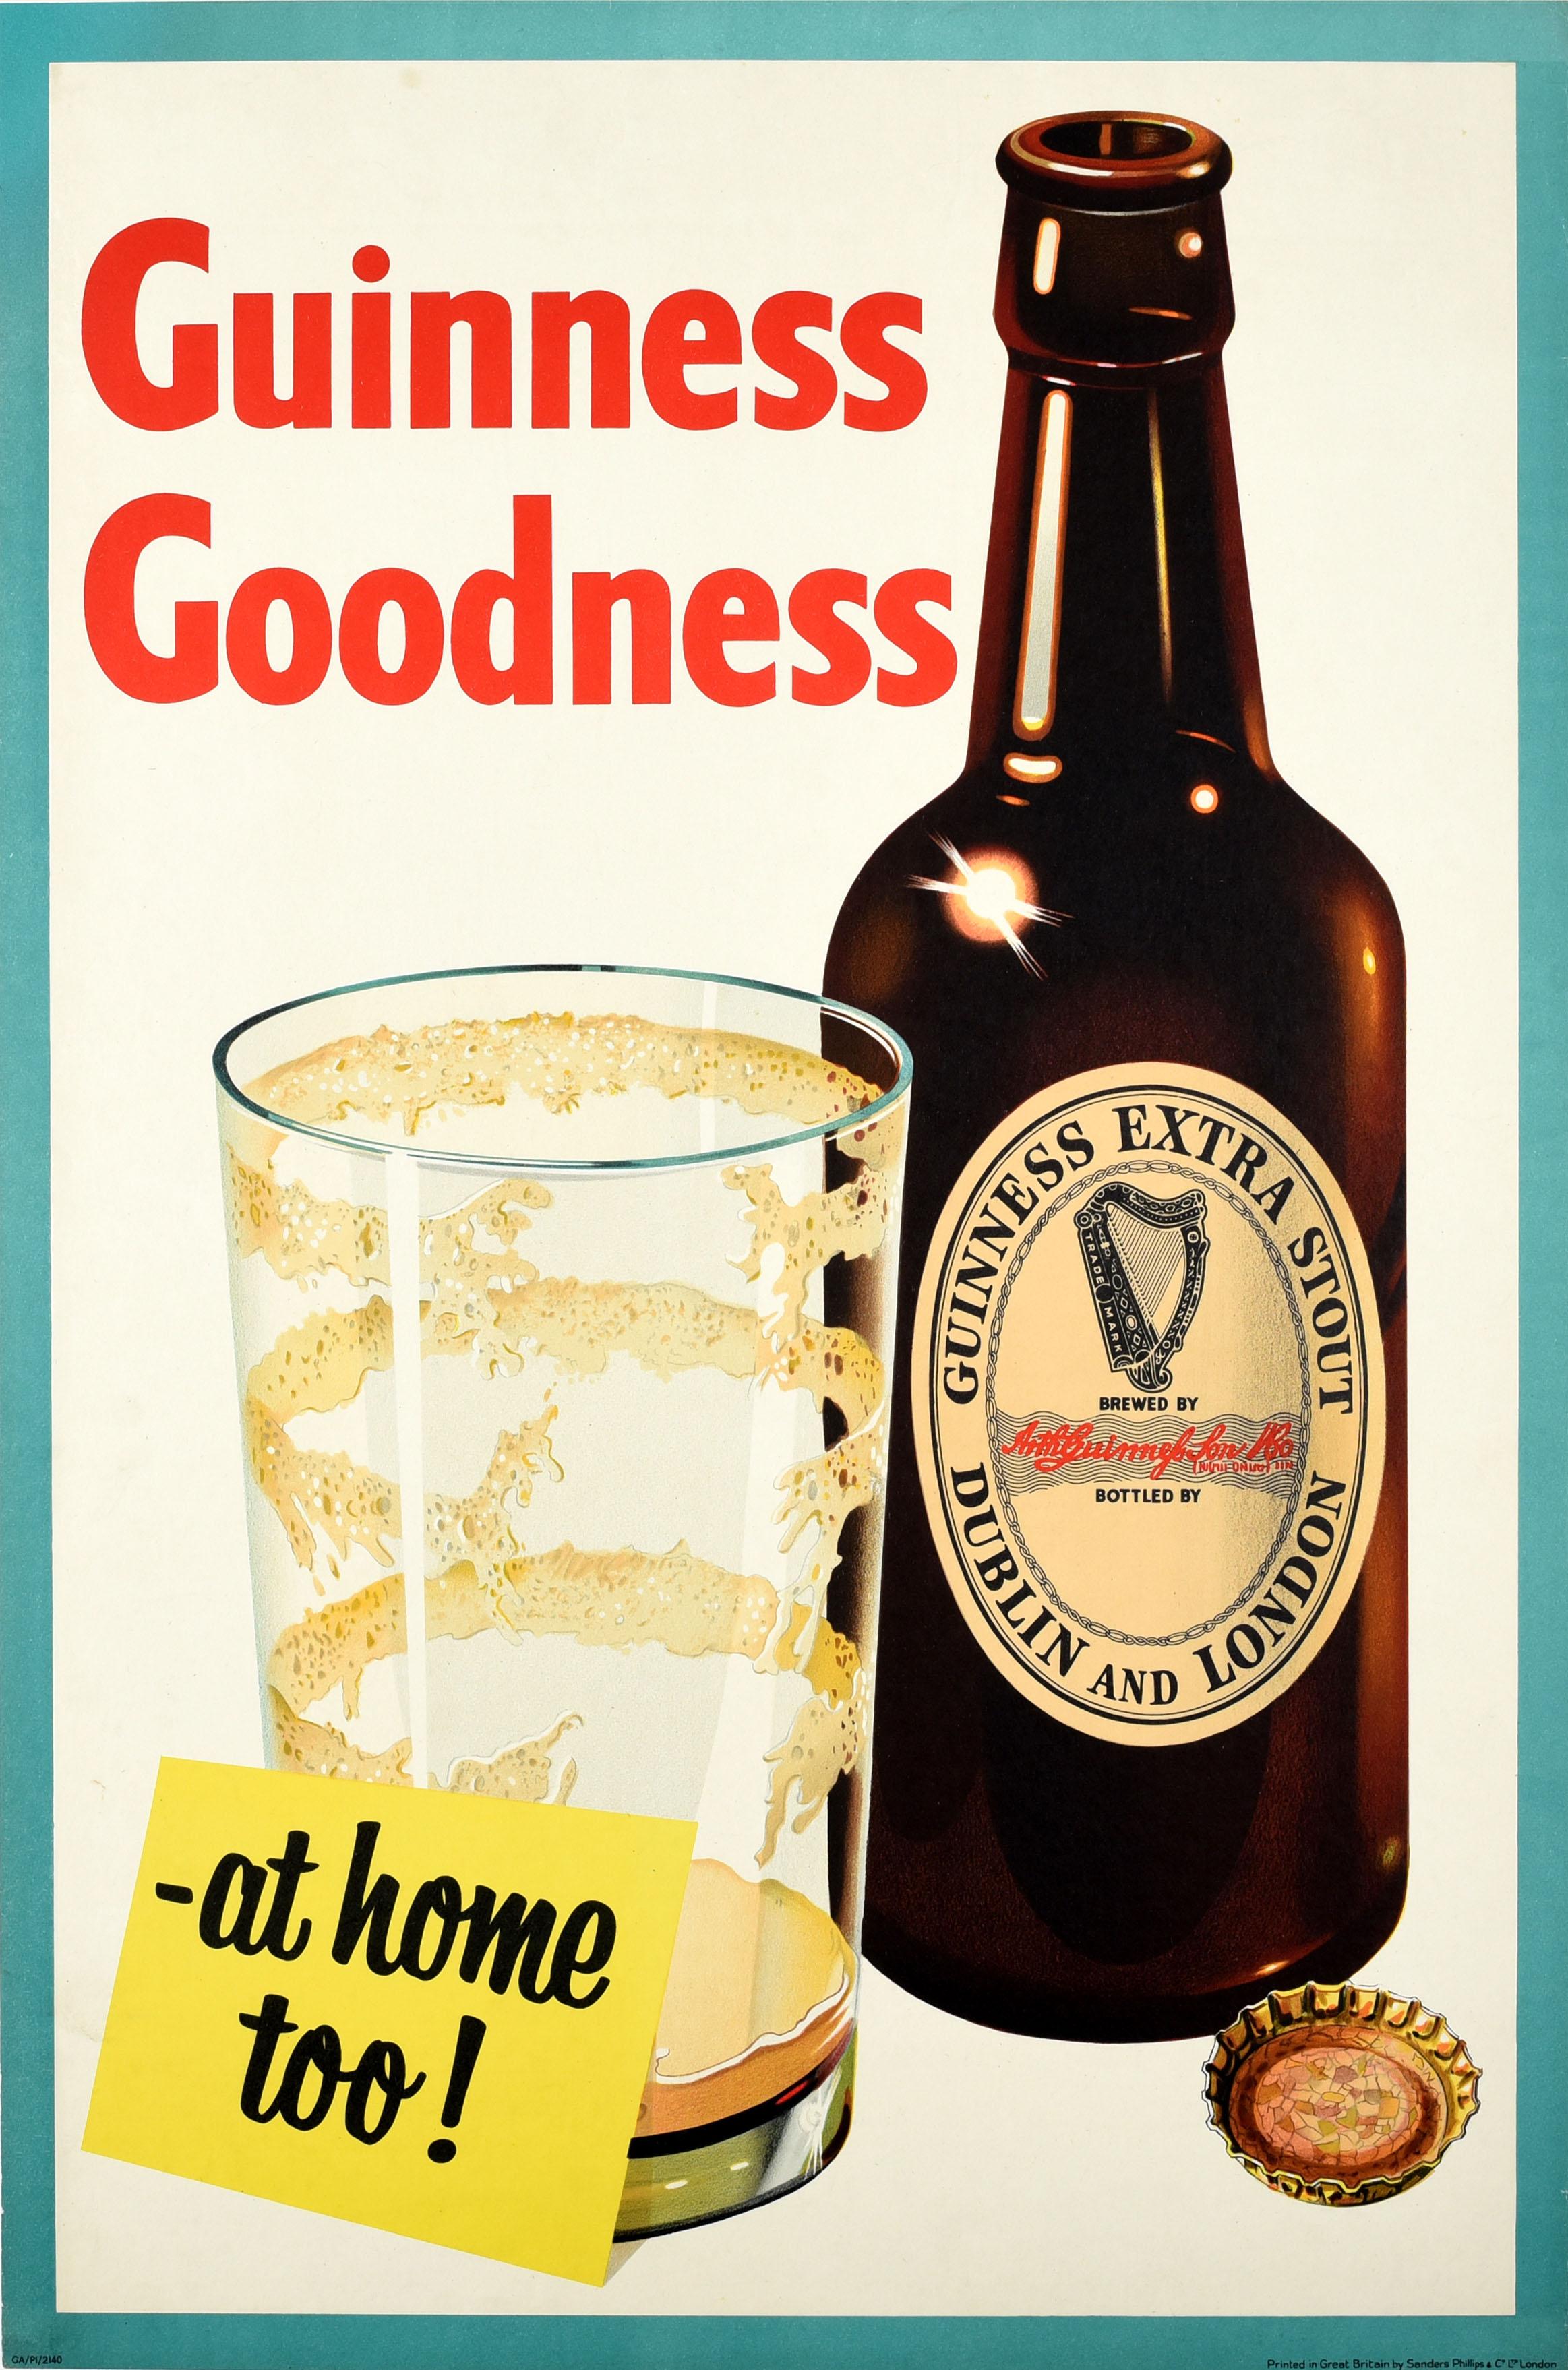 Unknown Print - Original Vintage Advertising Poster Guinness Goodness Irish Stout Beer Alcohol